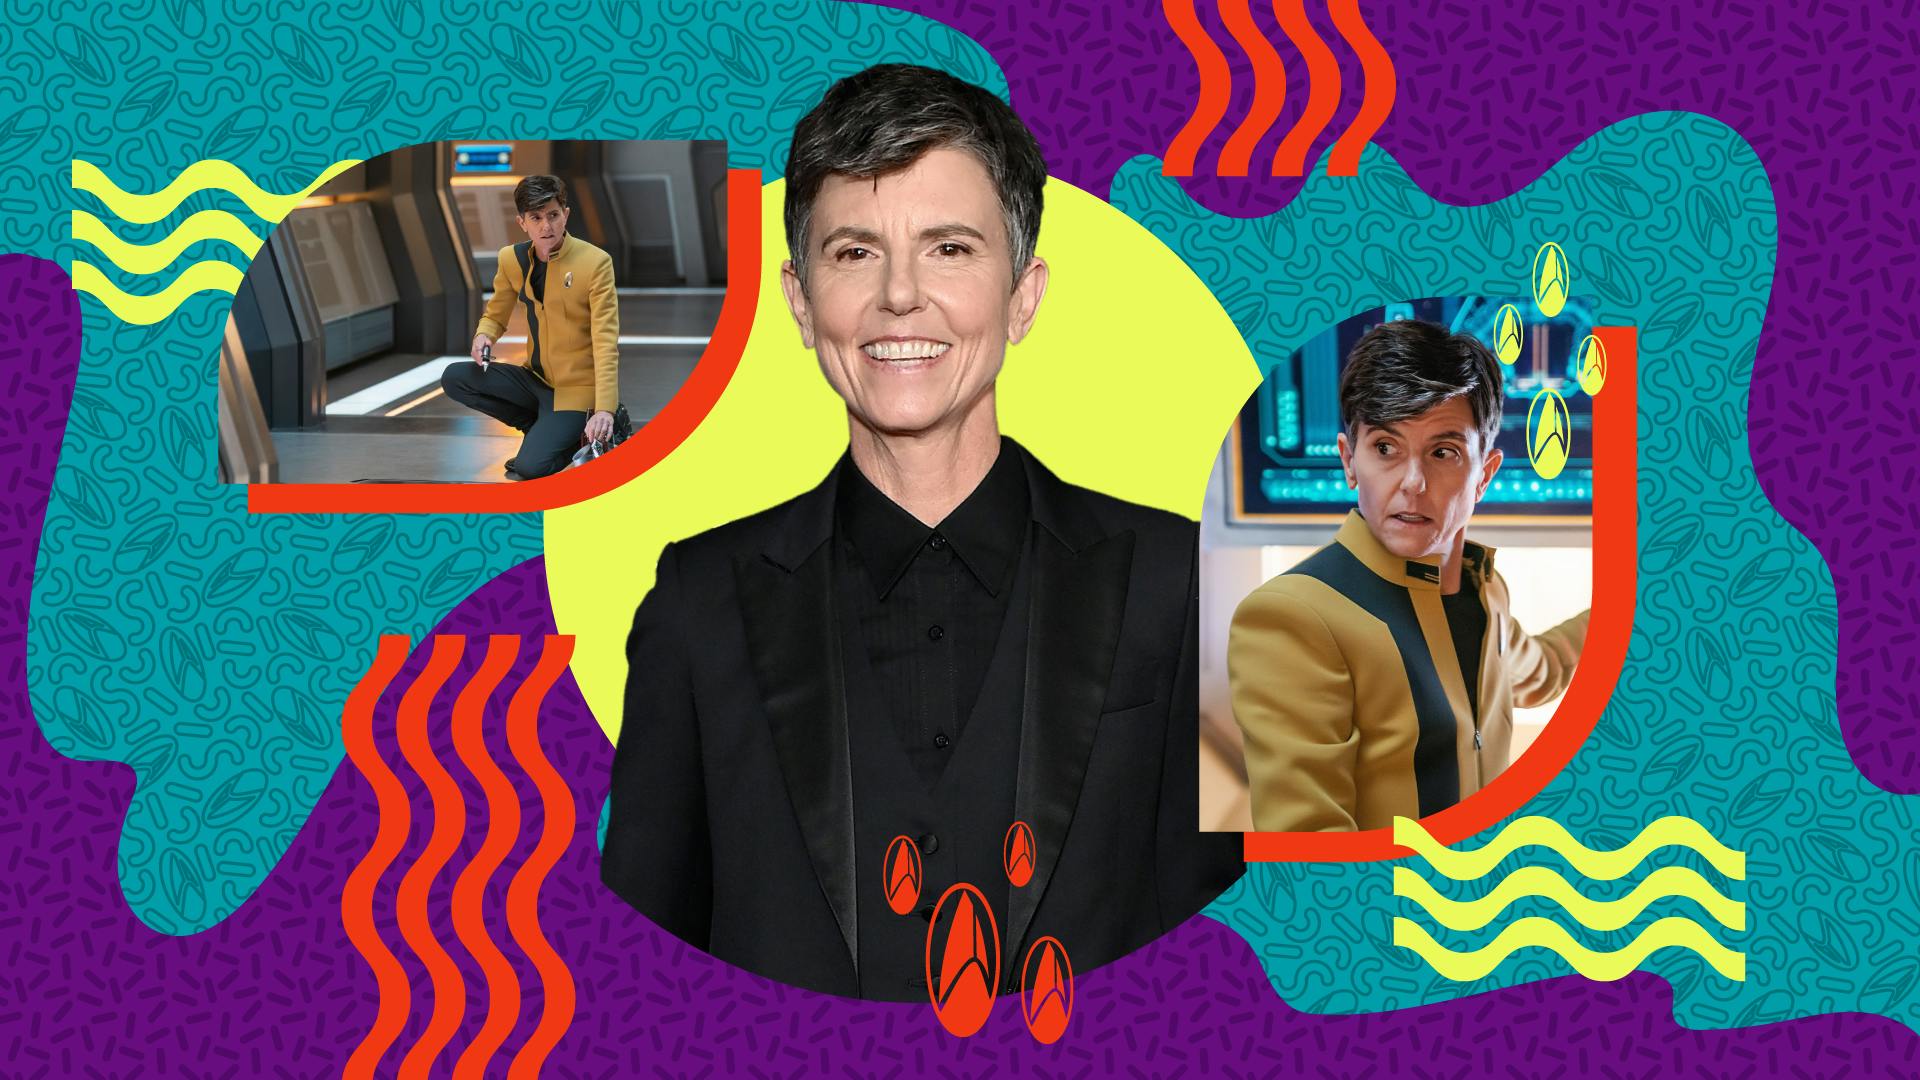 Graphic illustrated texture background with image of Tig Notaro and episodic stills of her character Jett Reno on Star Trek: Discovery